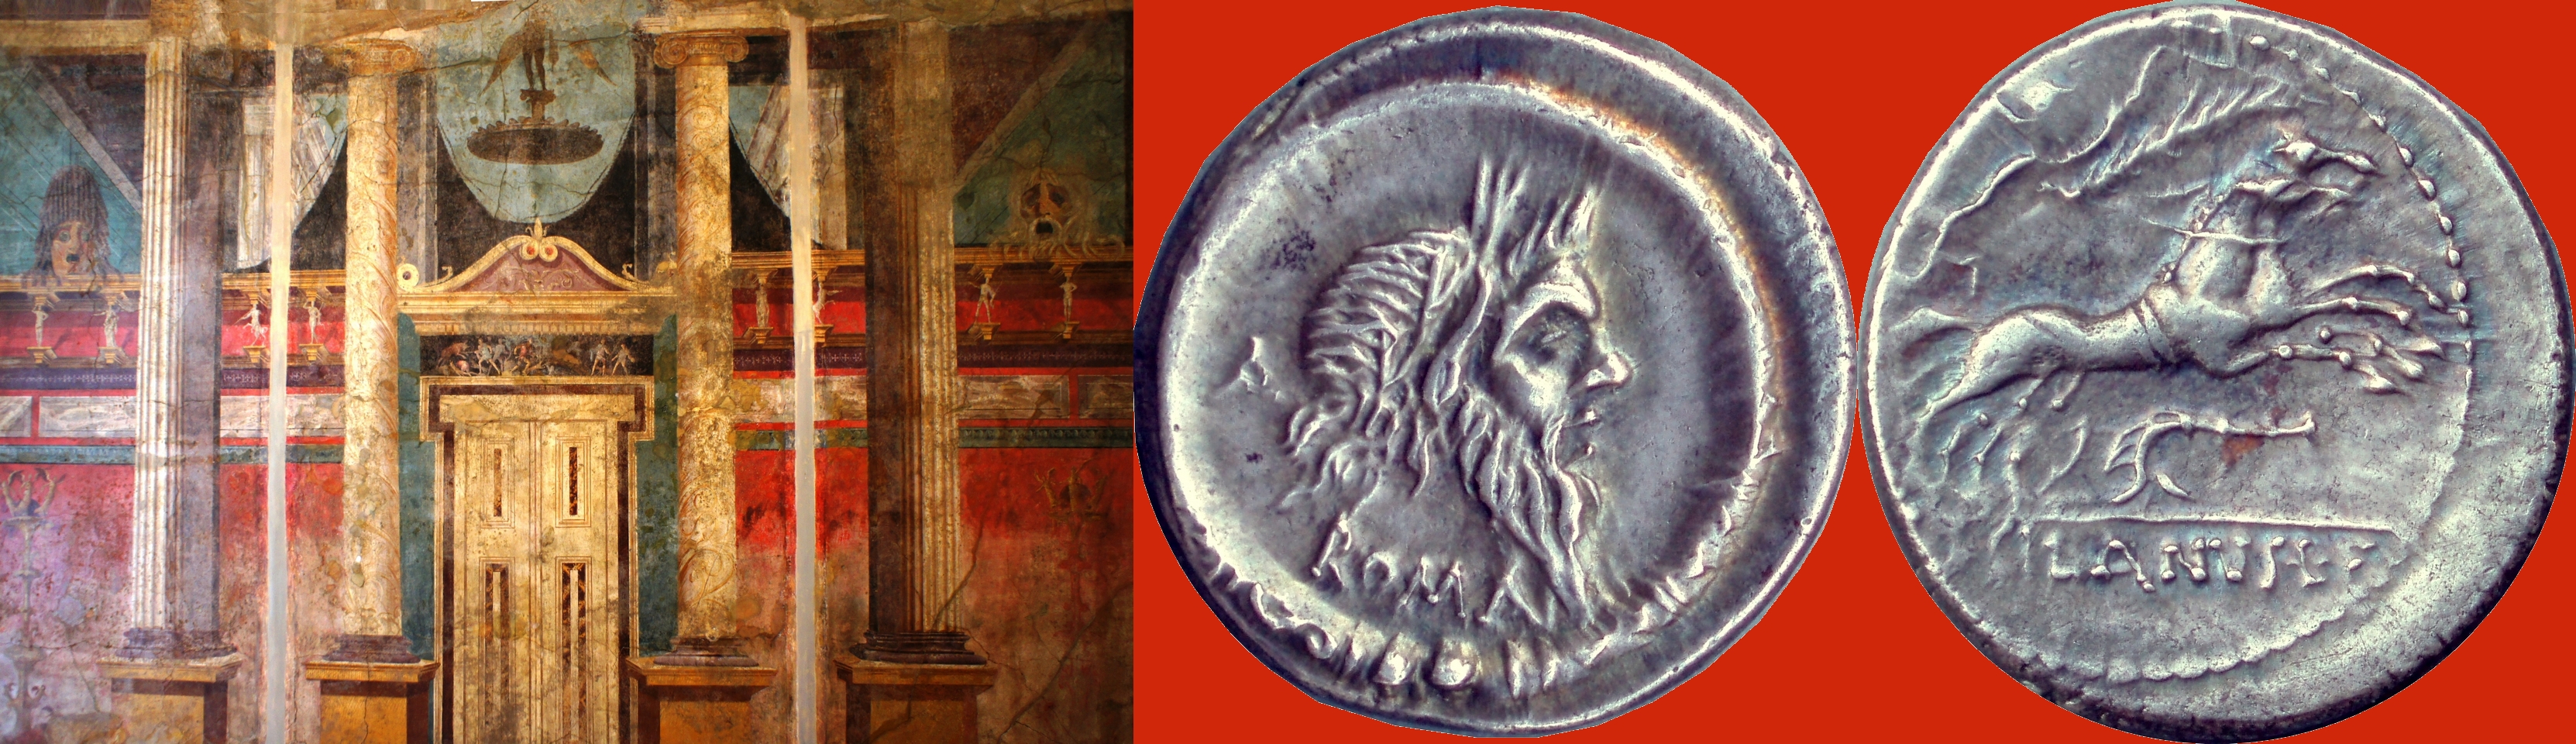 337/1 coin of Decimus Silanus with Mask of Silenus 91BC, and architectural fresco with Mask of Silenus from the Boscoreale villa of Fannius Synistor